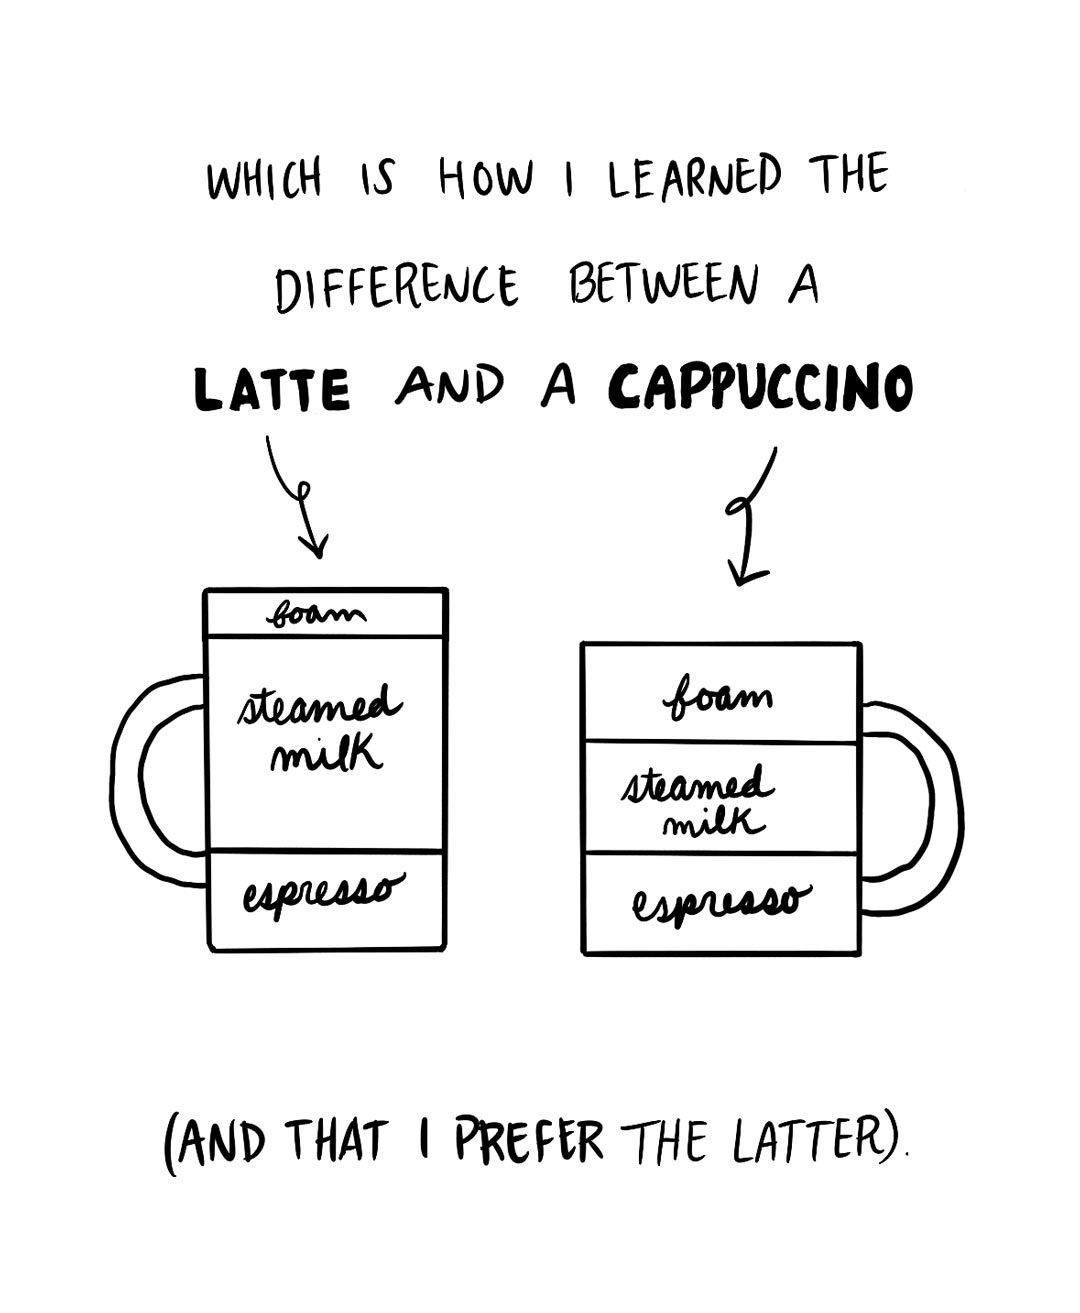 which is how I learned the difference between a latte and a cappuccino (and that I prefer the latter).